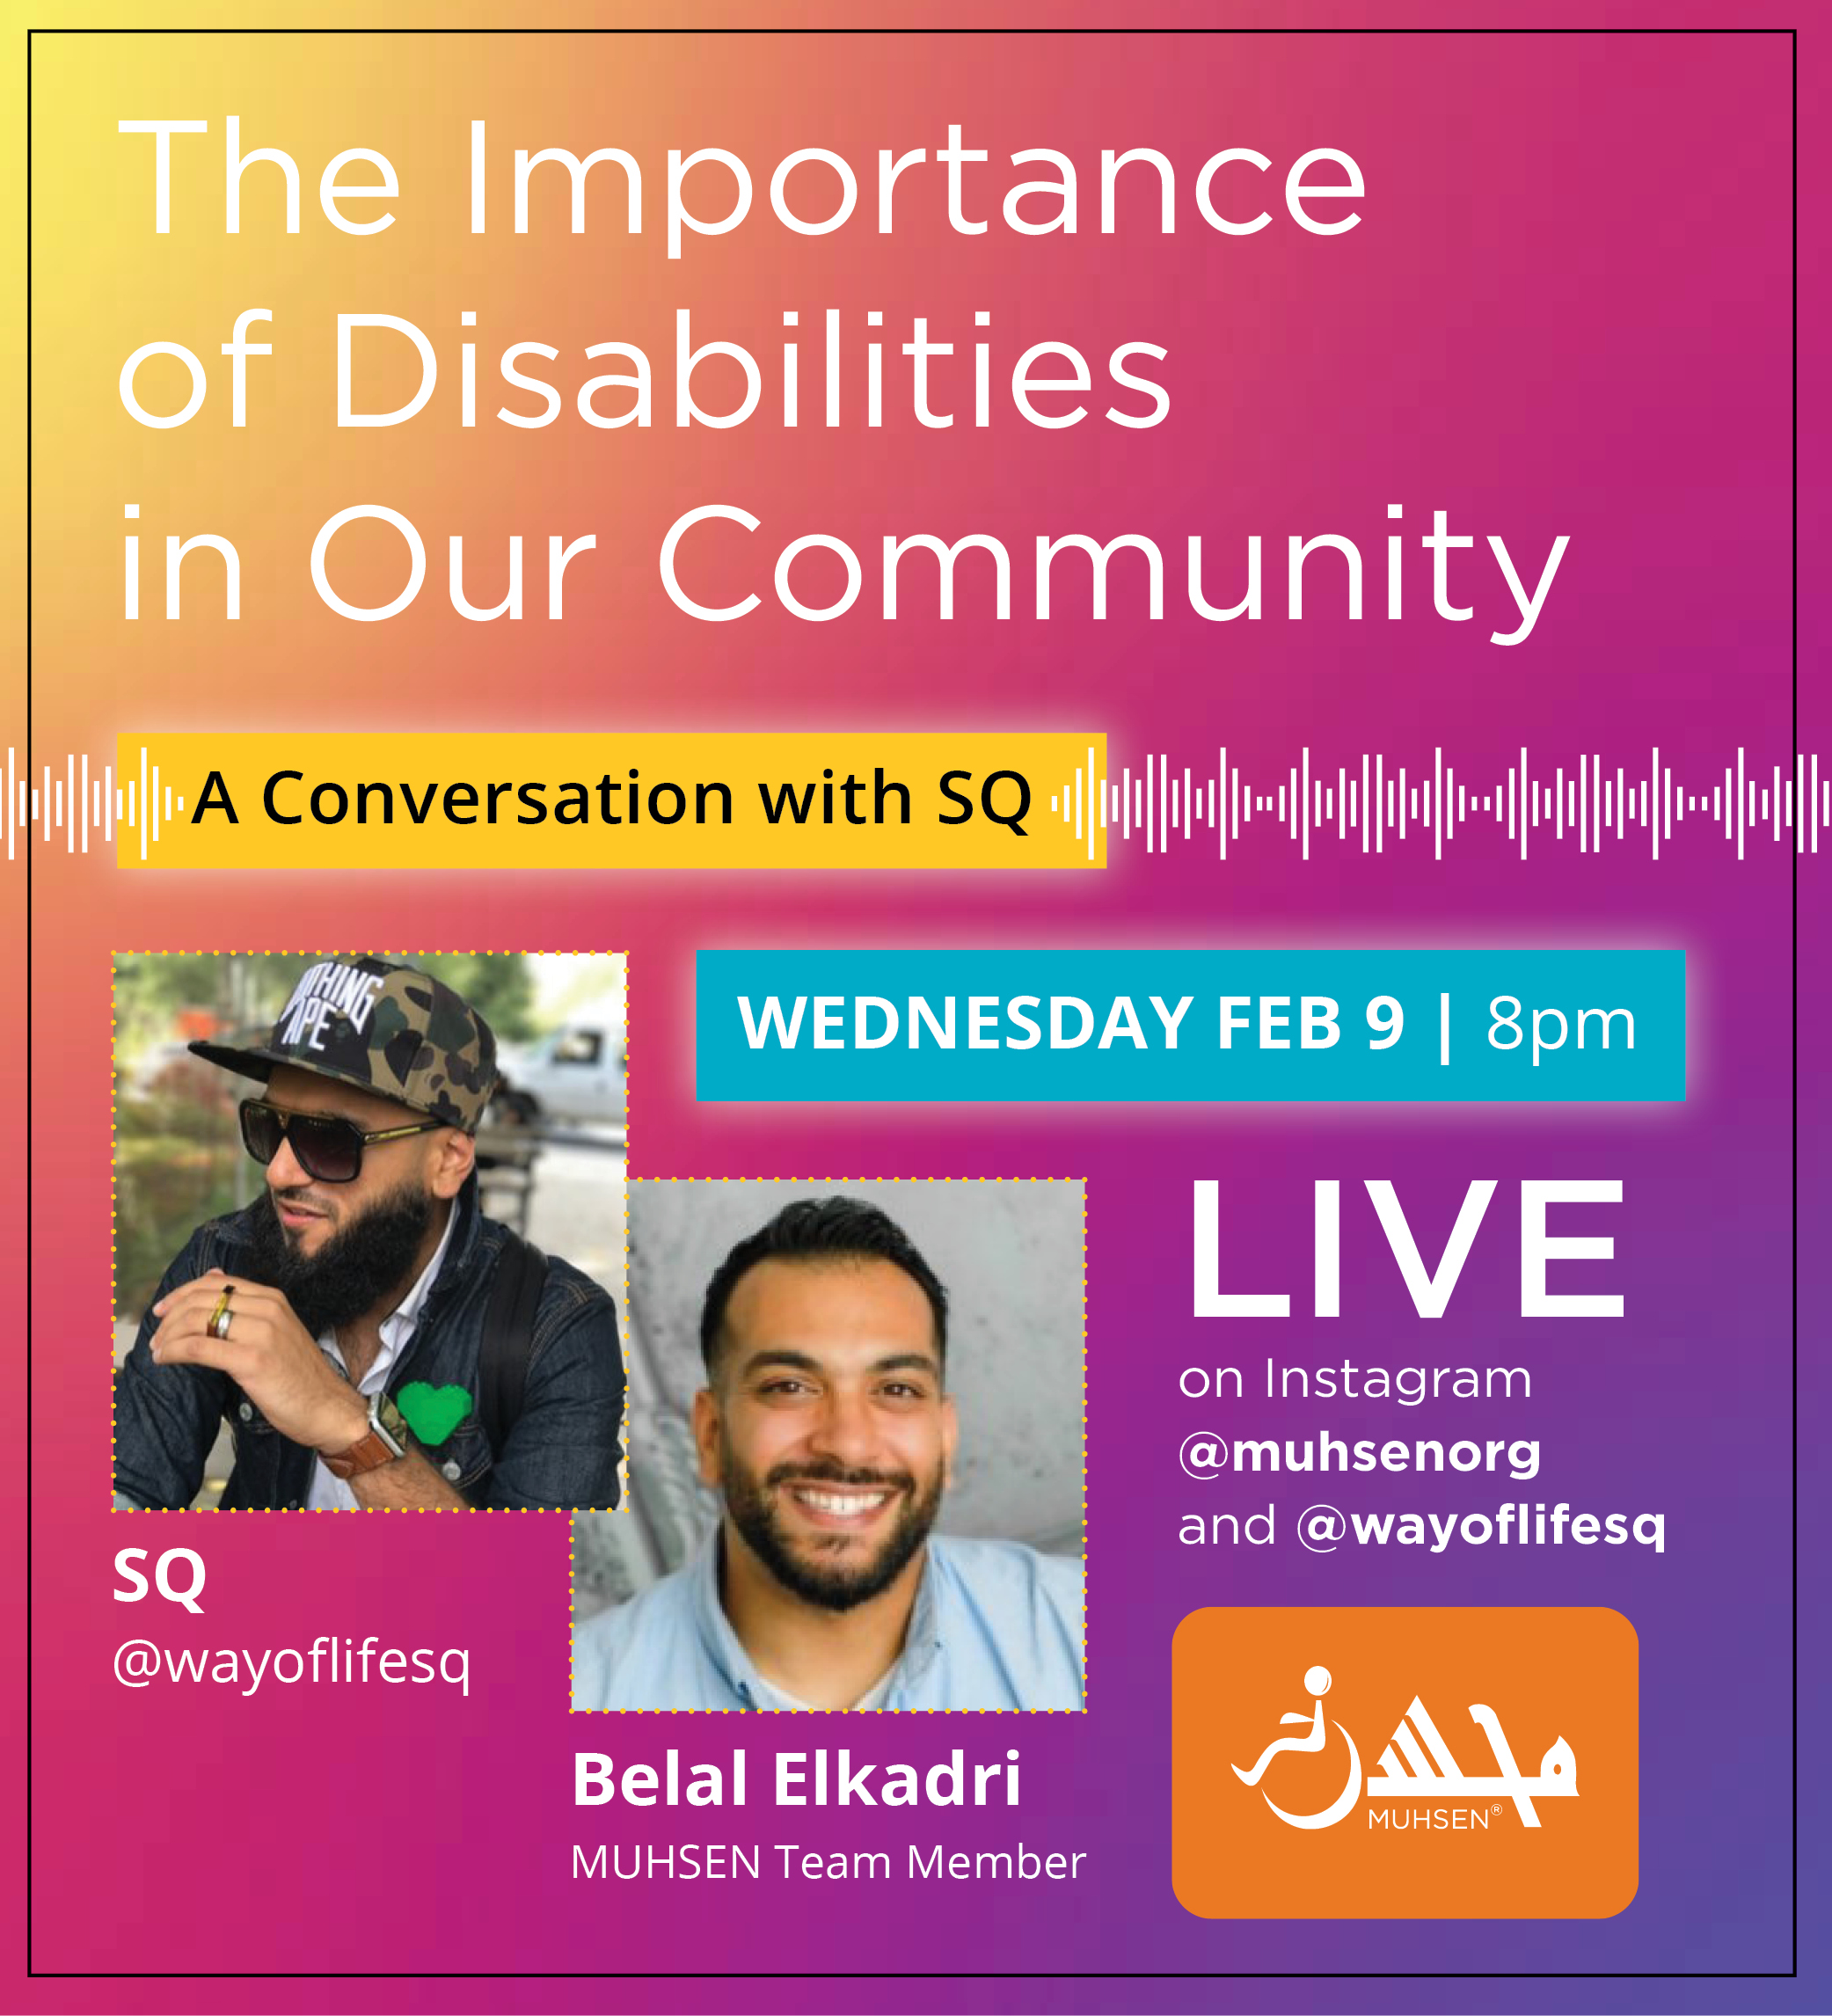 Purple pink and yellow gradient background. In white text reads the The Importance of Disabilities in Our Community. Beneath in a yellow textbox reads A Conversation with SQ. Below is a blue textbox reading Wednesday February 9th at 8pm. Beneath to the left is an image of SQ @wayoflifesq and an image of Belal Elkadri, Muhsen team member. To the right is text that reads LIVE on instagram @muhsenorg and @wayoflifesq . At the bottom right corner is an orange Muhsen logo